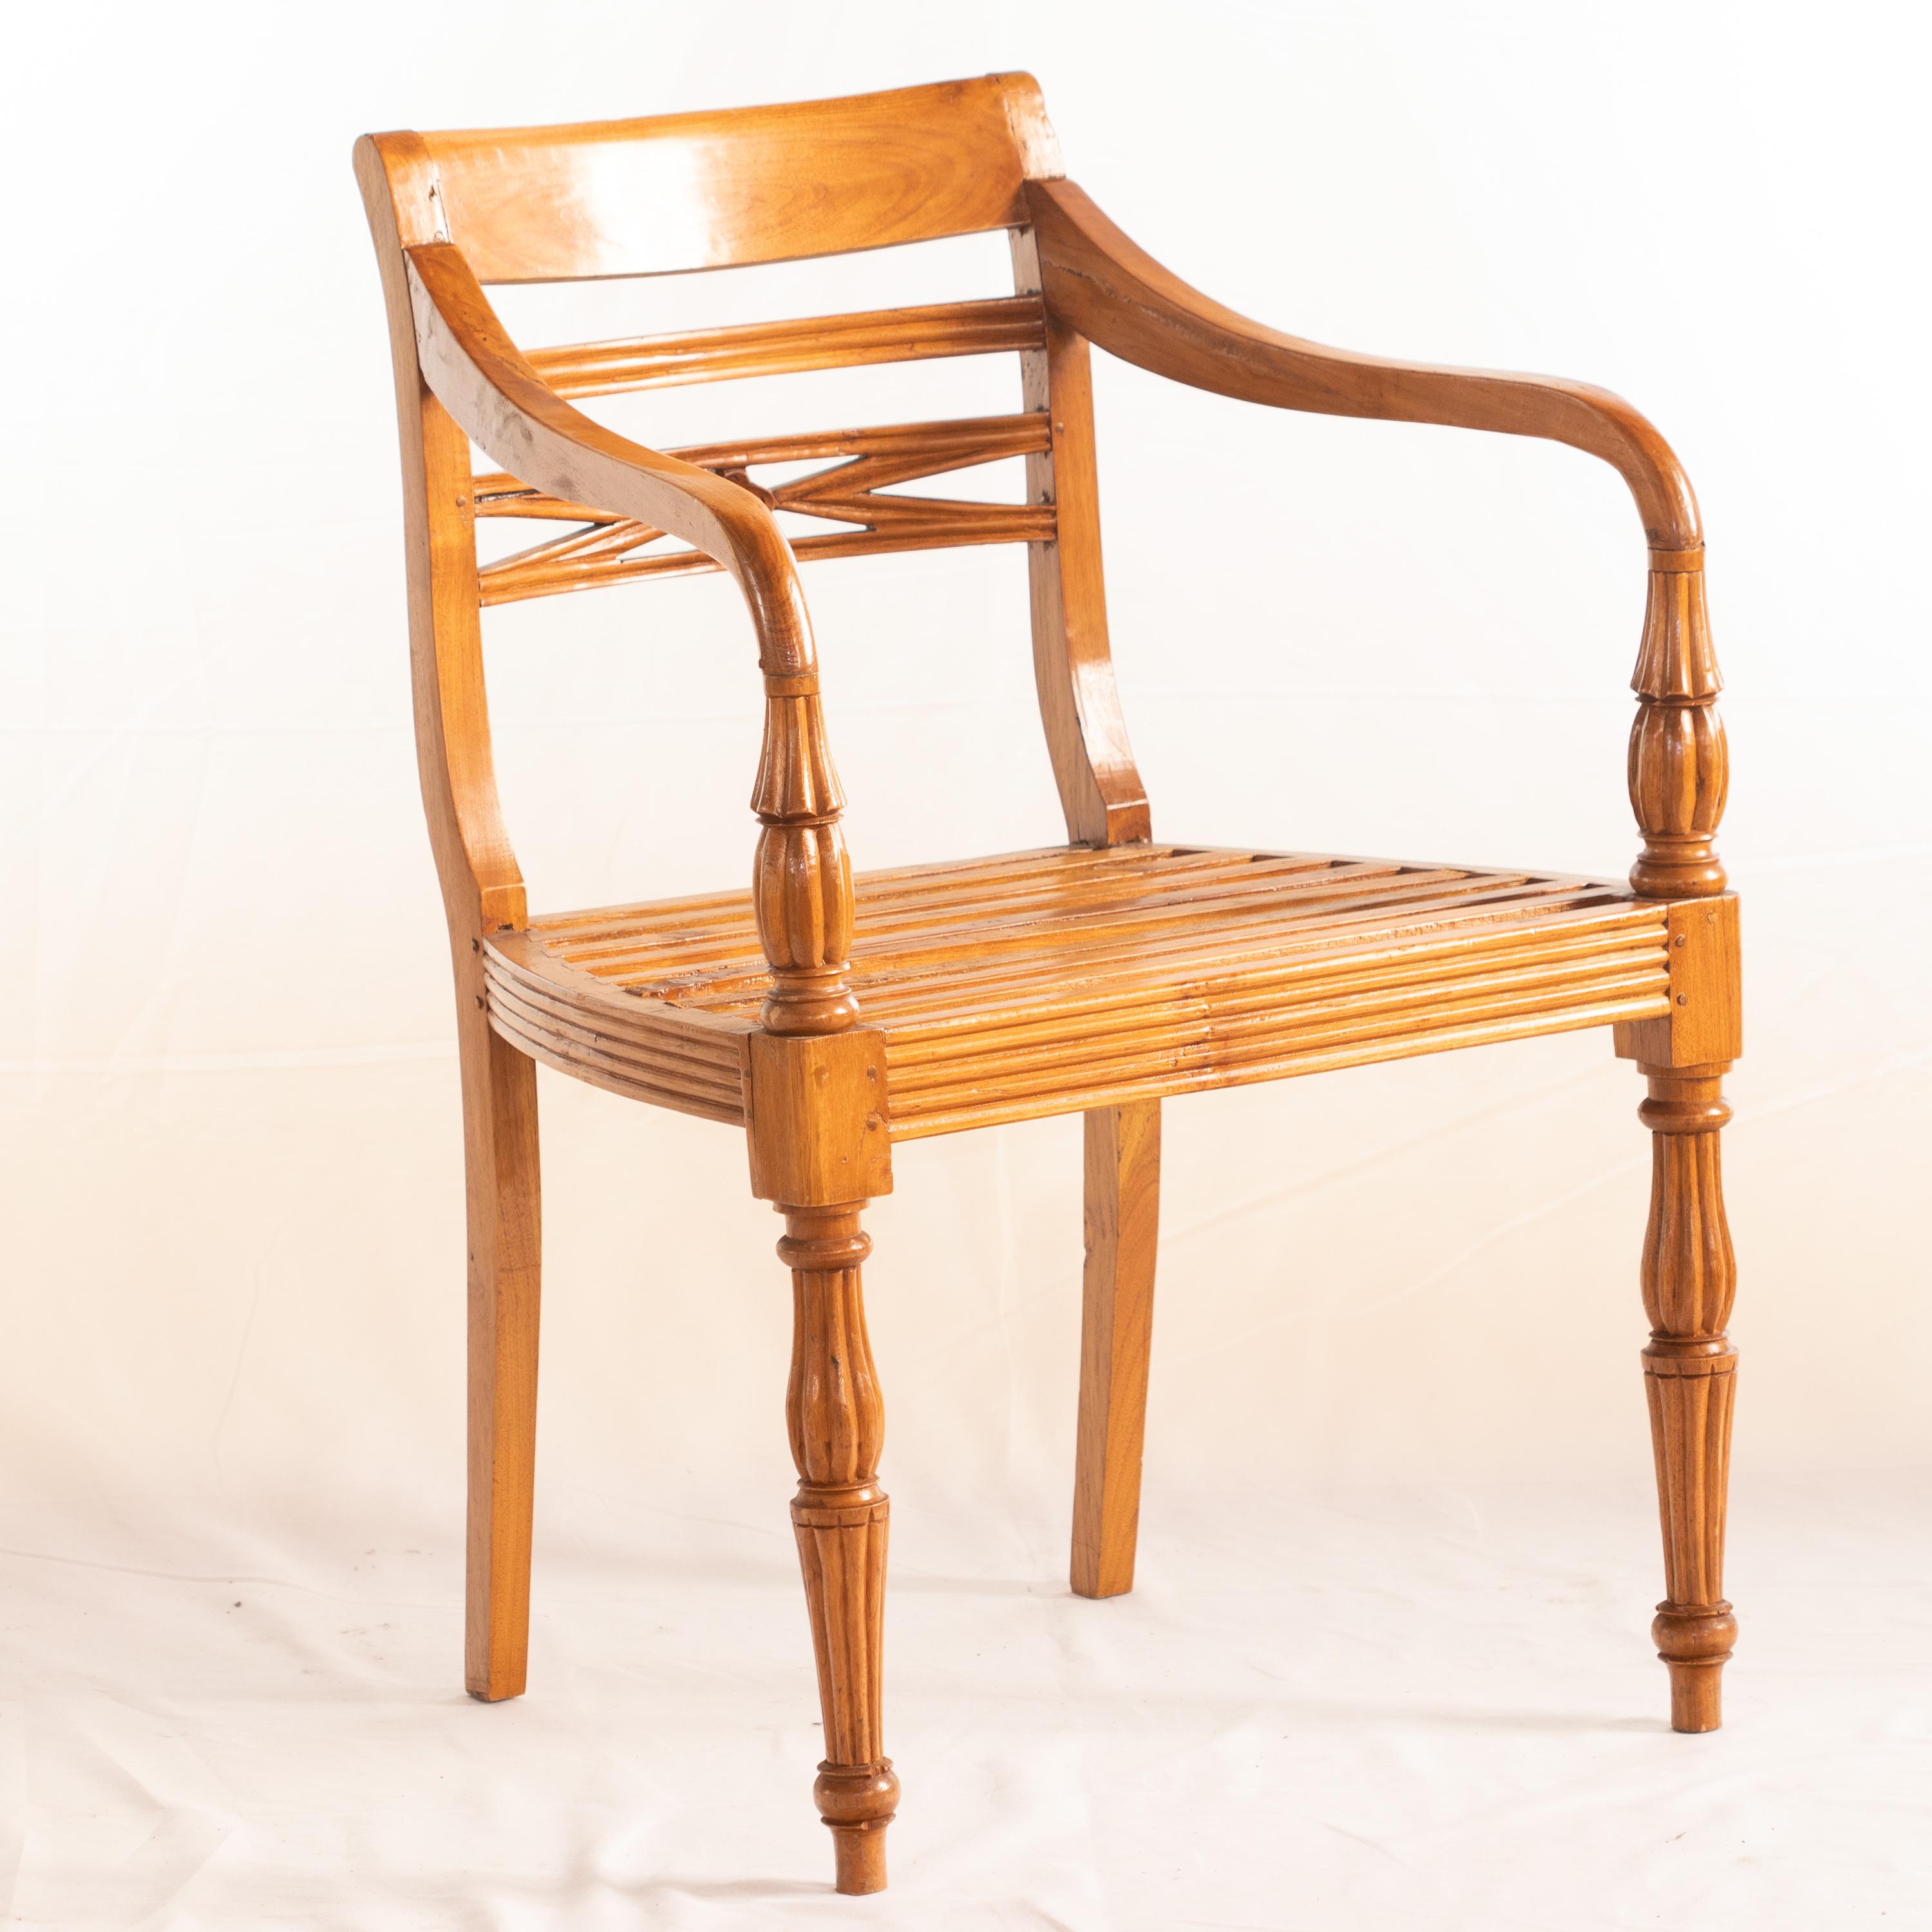 Carved solid chair for garden or home forniture. Wood chair in light brown color with a minimalist look enhanced with a vintage design. Wood furniture. New condition, never used. Comfortable furniture with a italian and innovative legs modern